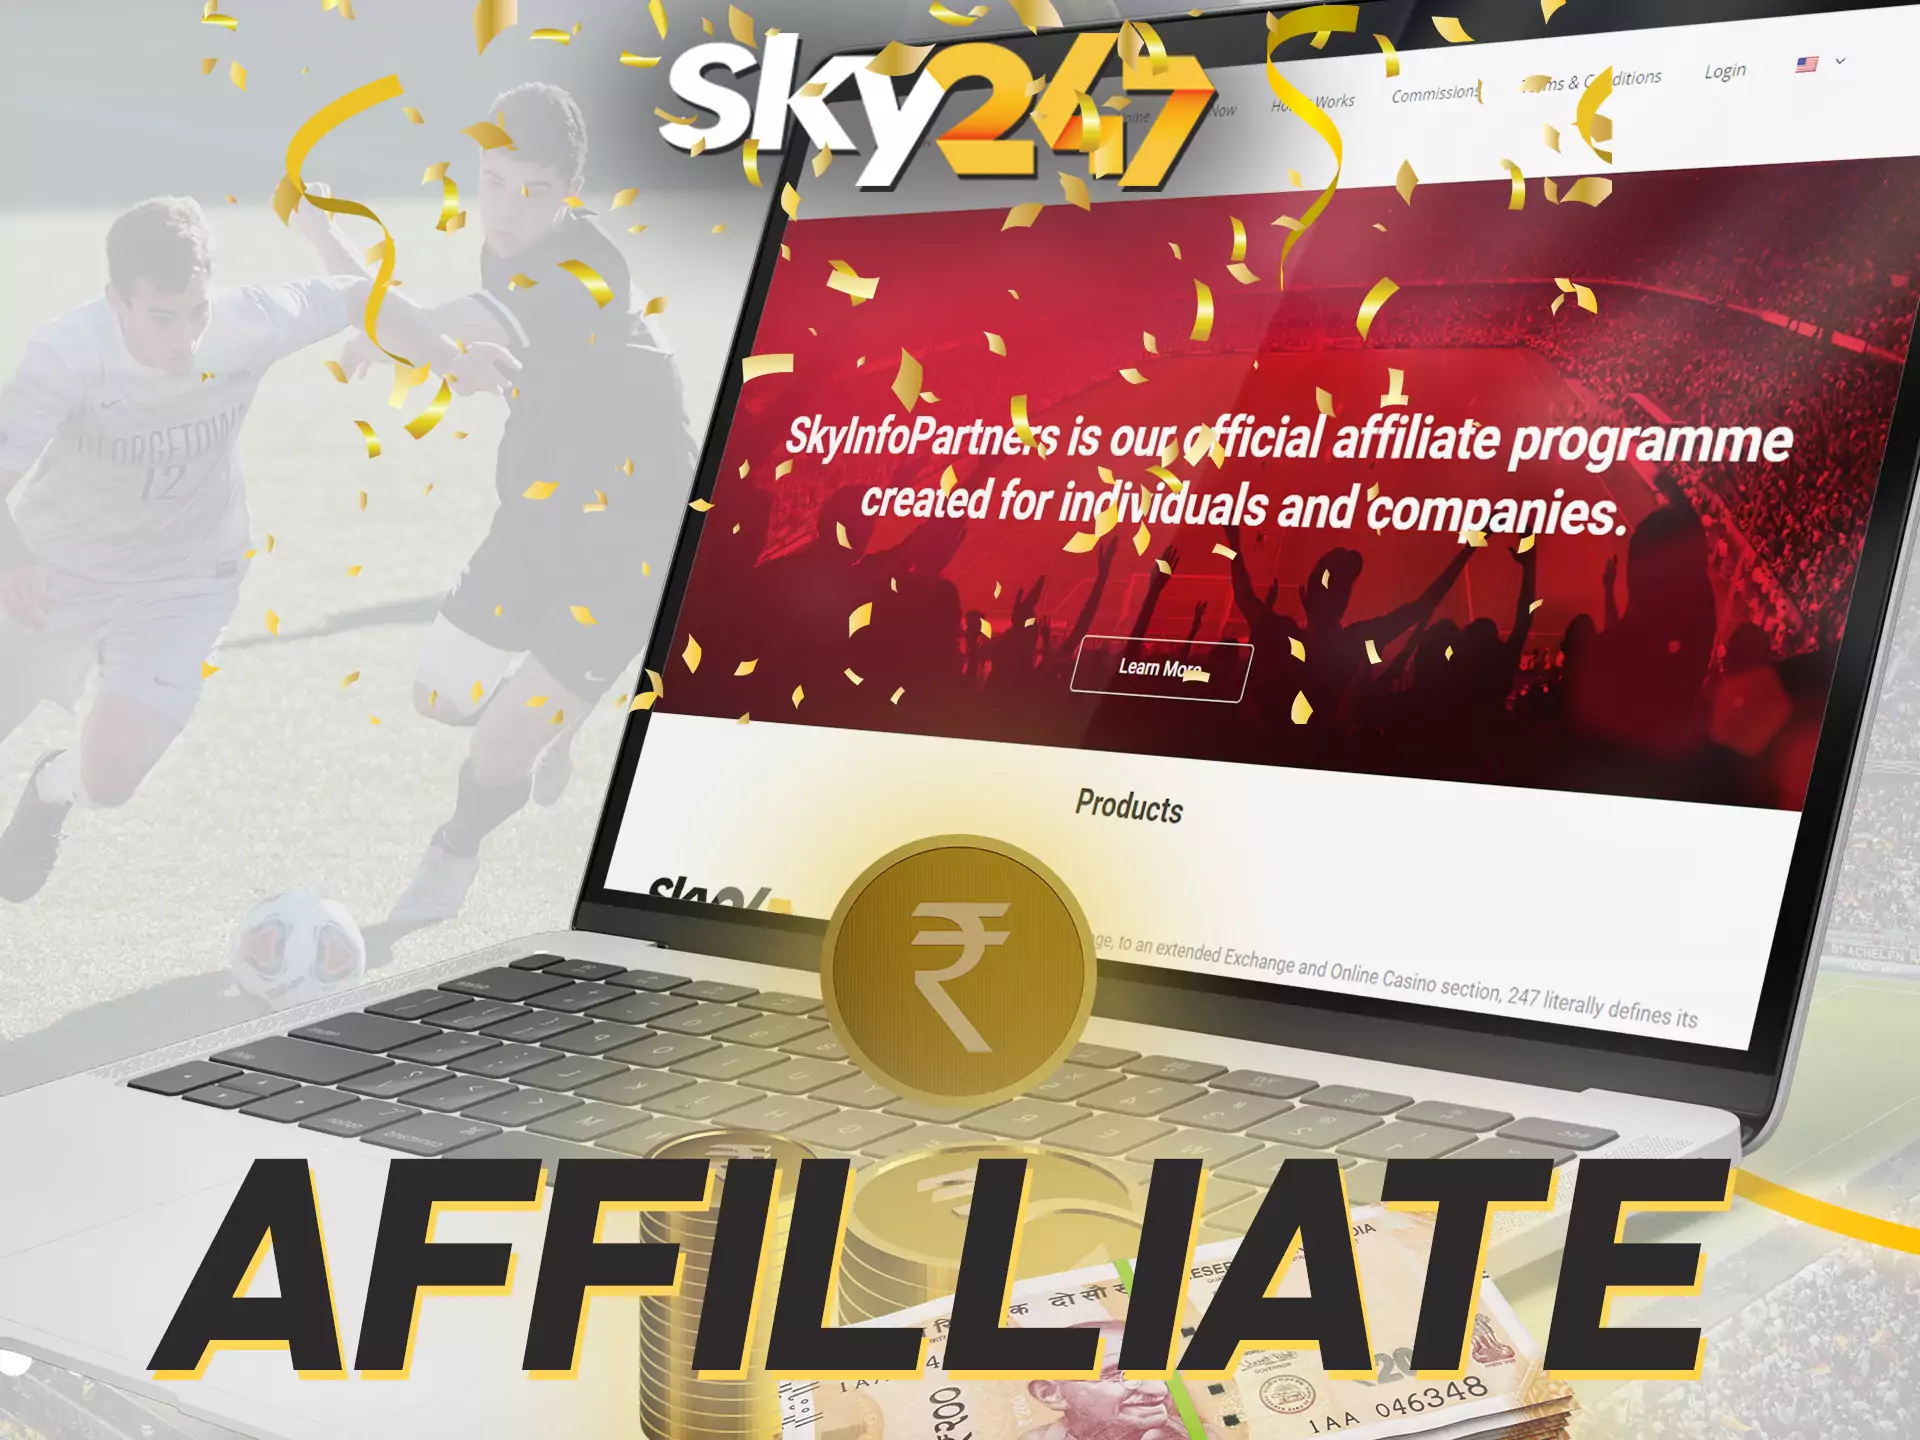 Join the Sky247 affiliate program and get bonuses for inviting friends.